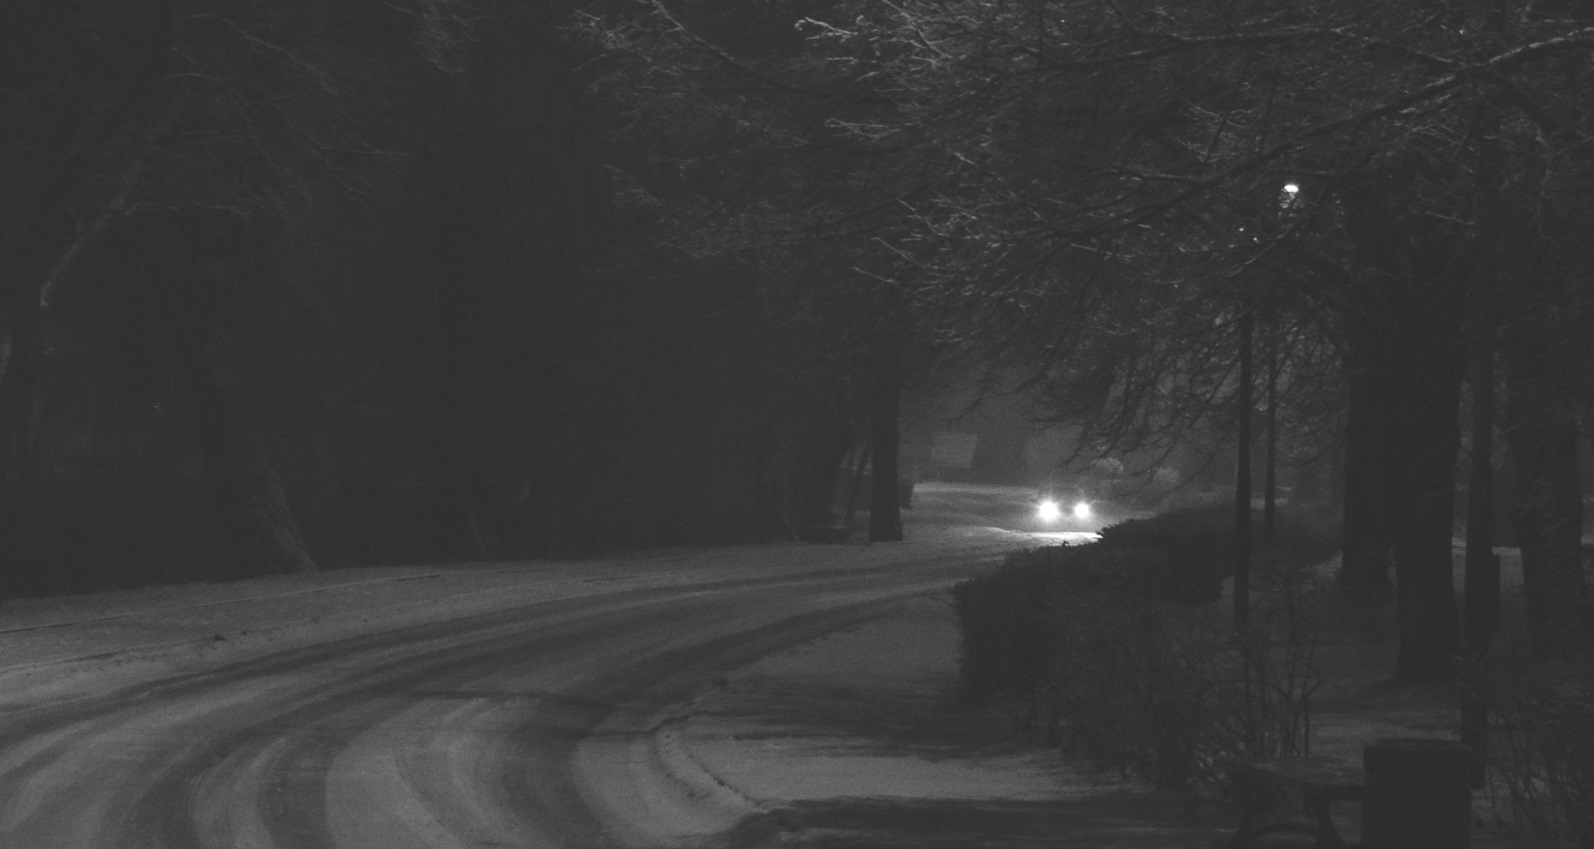 black and white photo of car headlights on snowy road